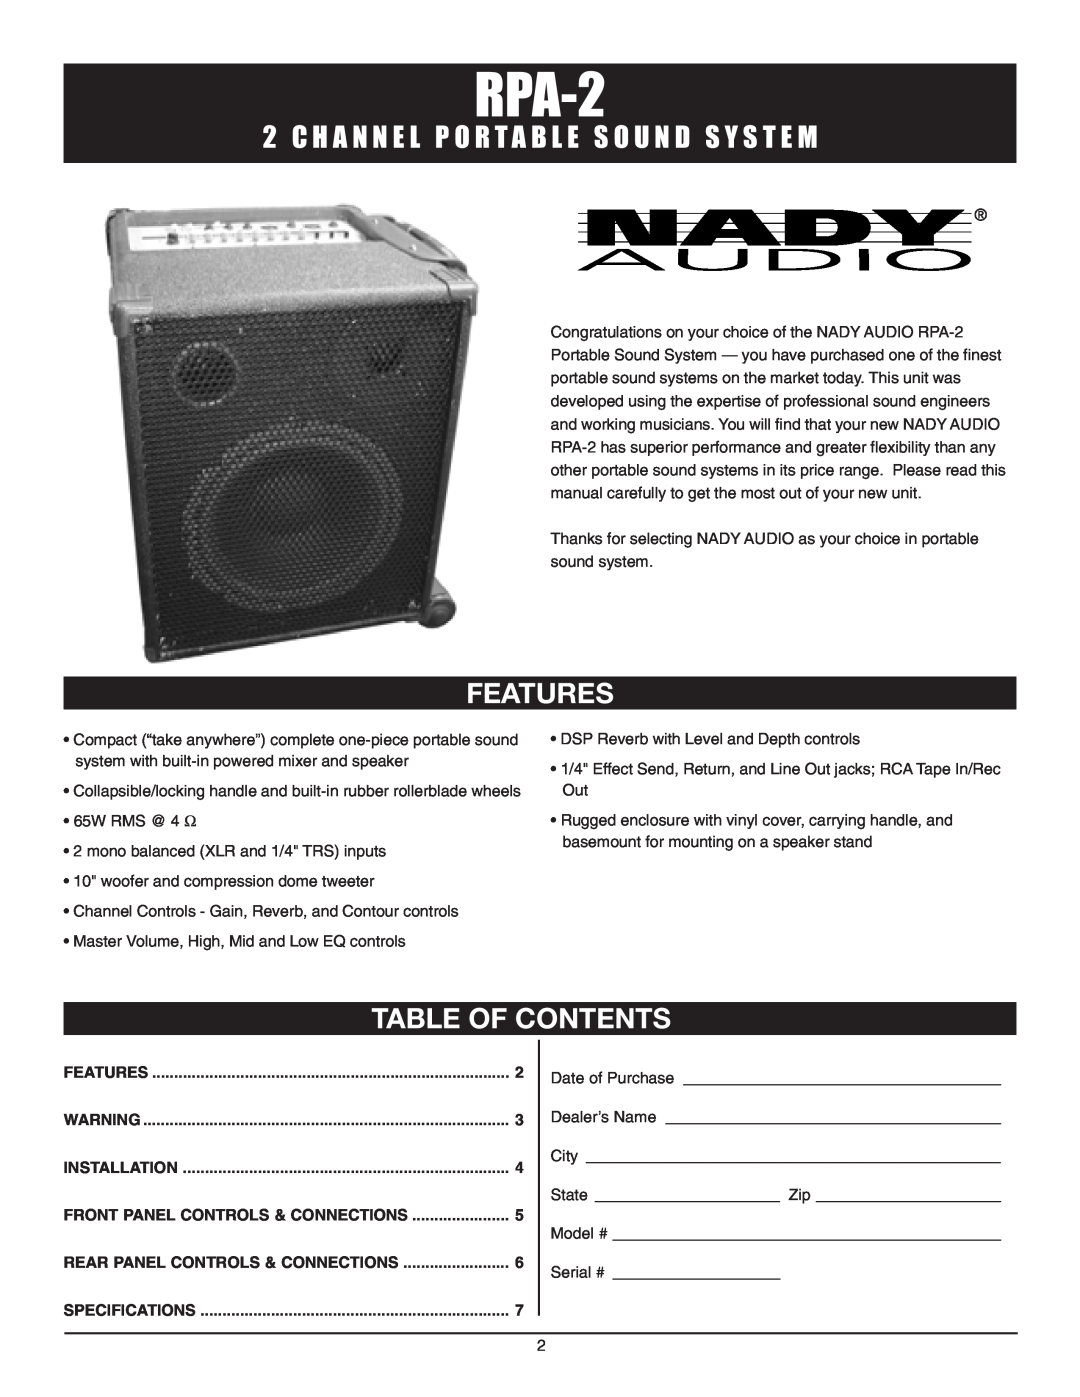 Nady Systems RPA-2 owner manual Features, Table Of Contents 